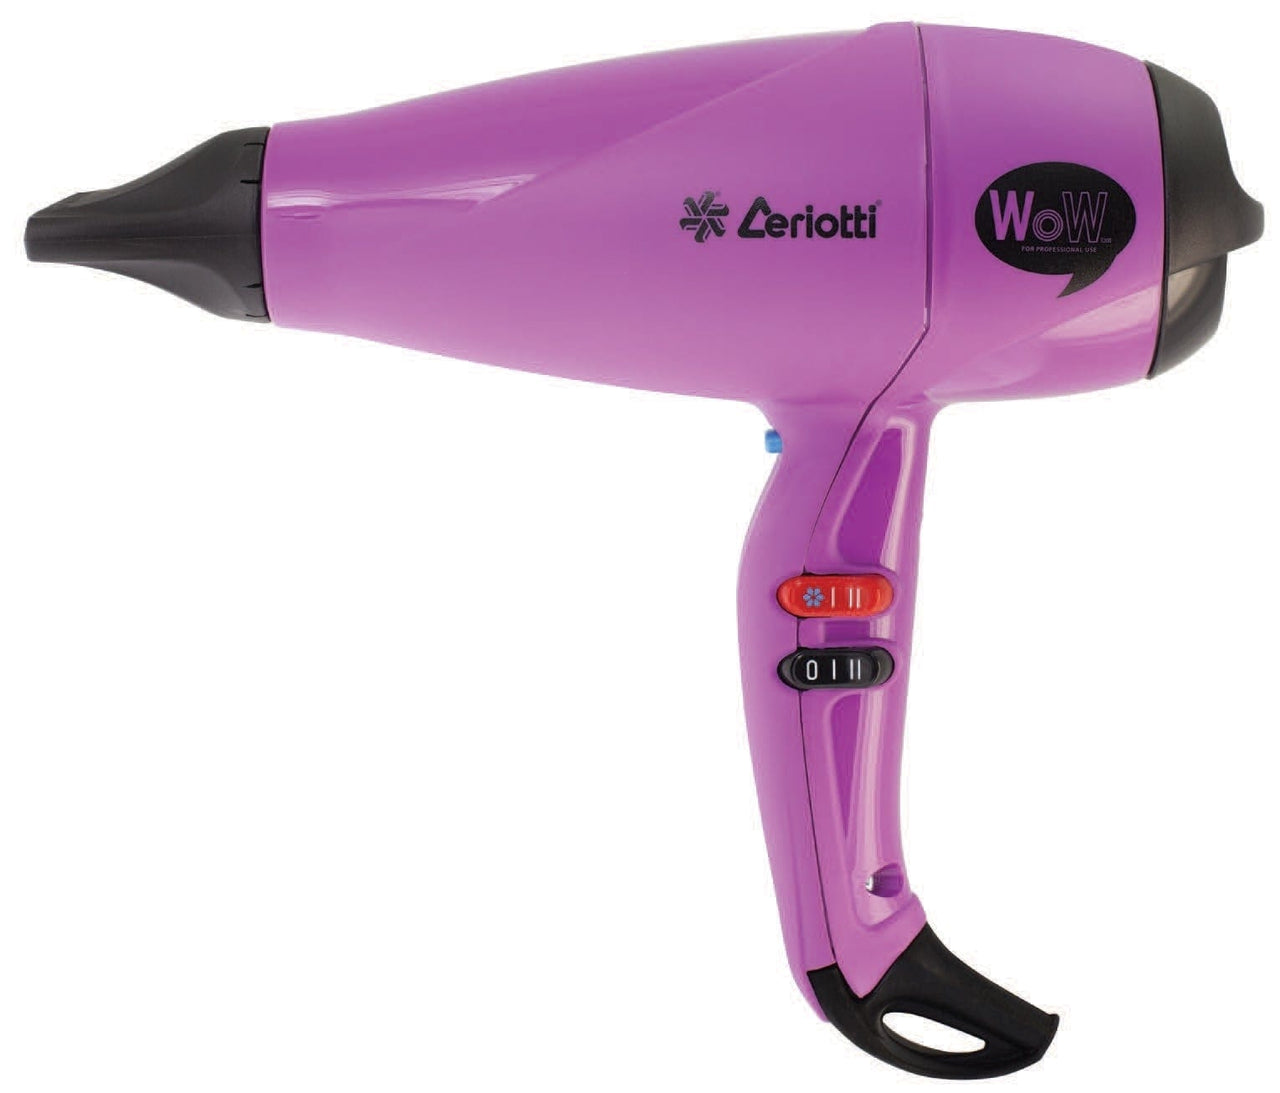 CERIOTTI_Ceriotti WoW 3200 Professional Hairdryer_Cosmetic World